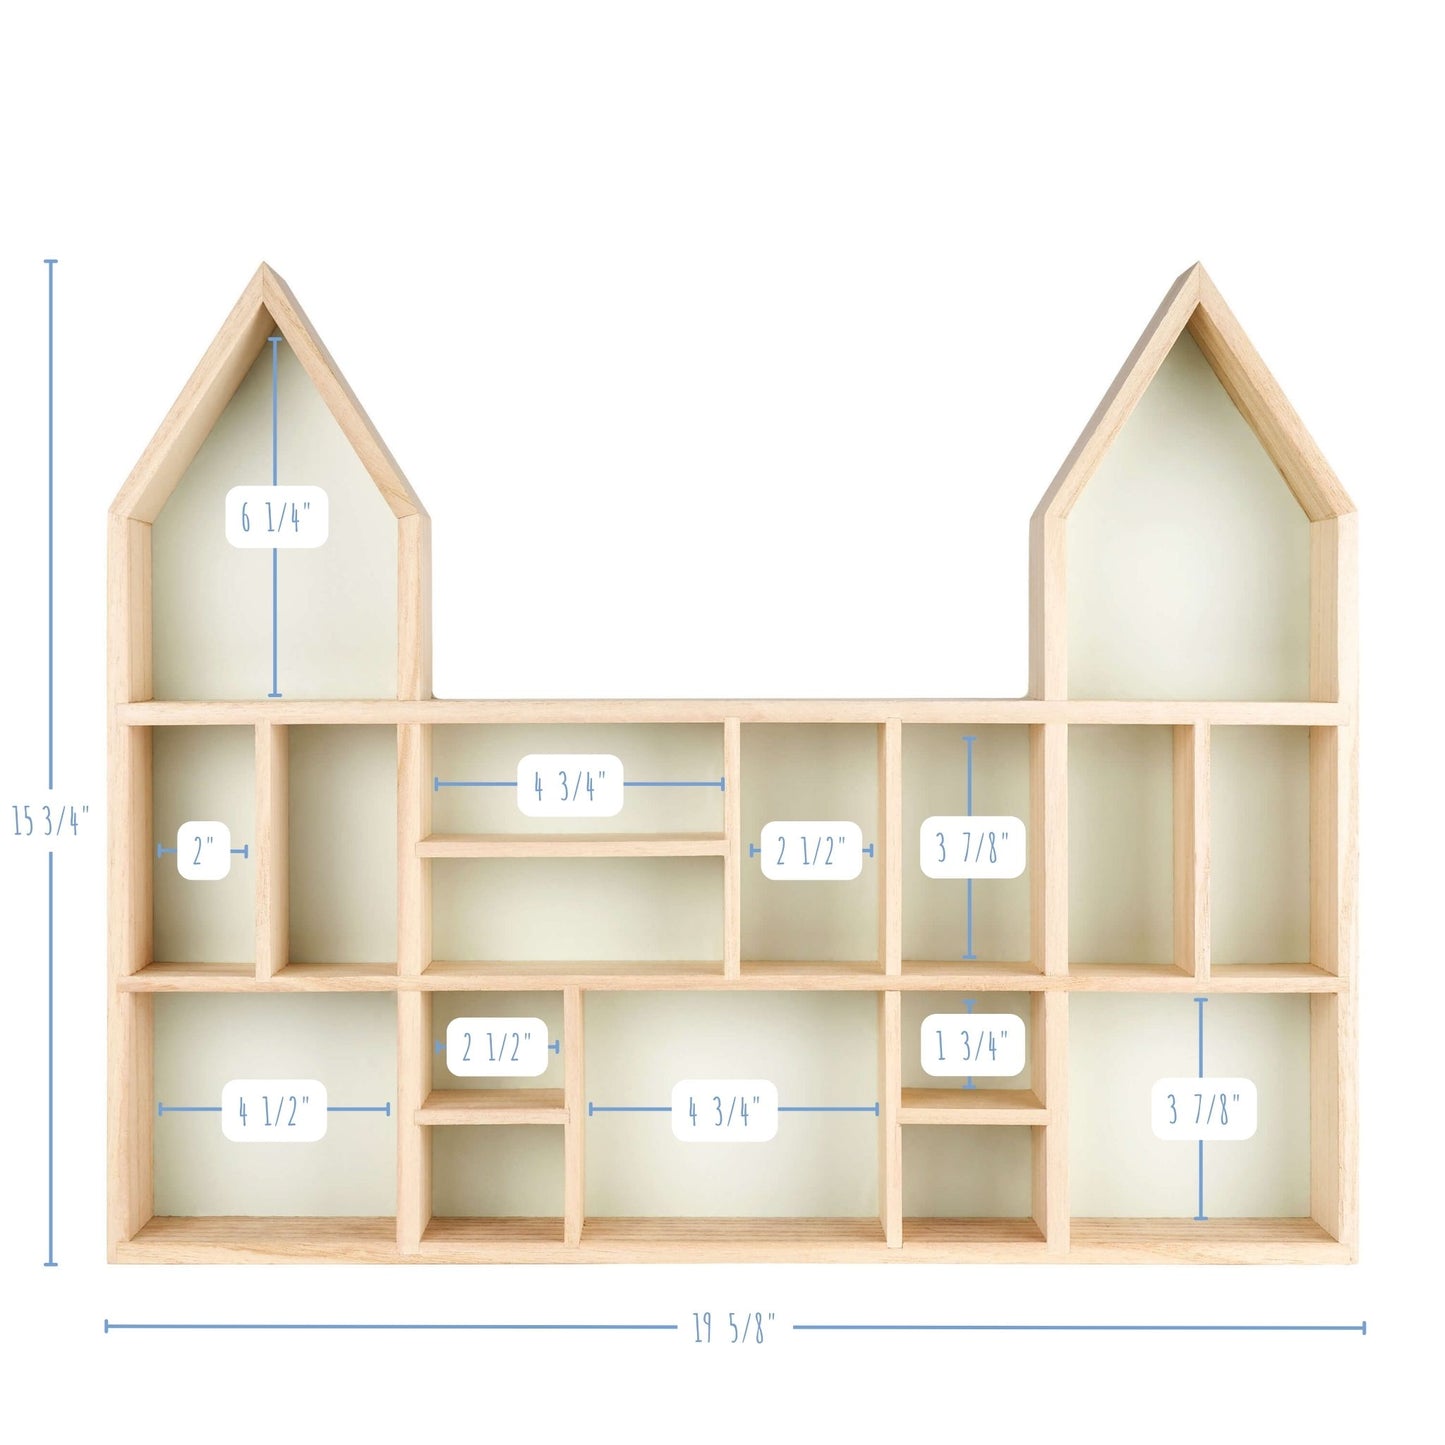 Castle shaped wooden toy display shelf with a mint-colored backboard - with compartments size detailed (front view)